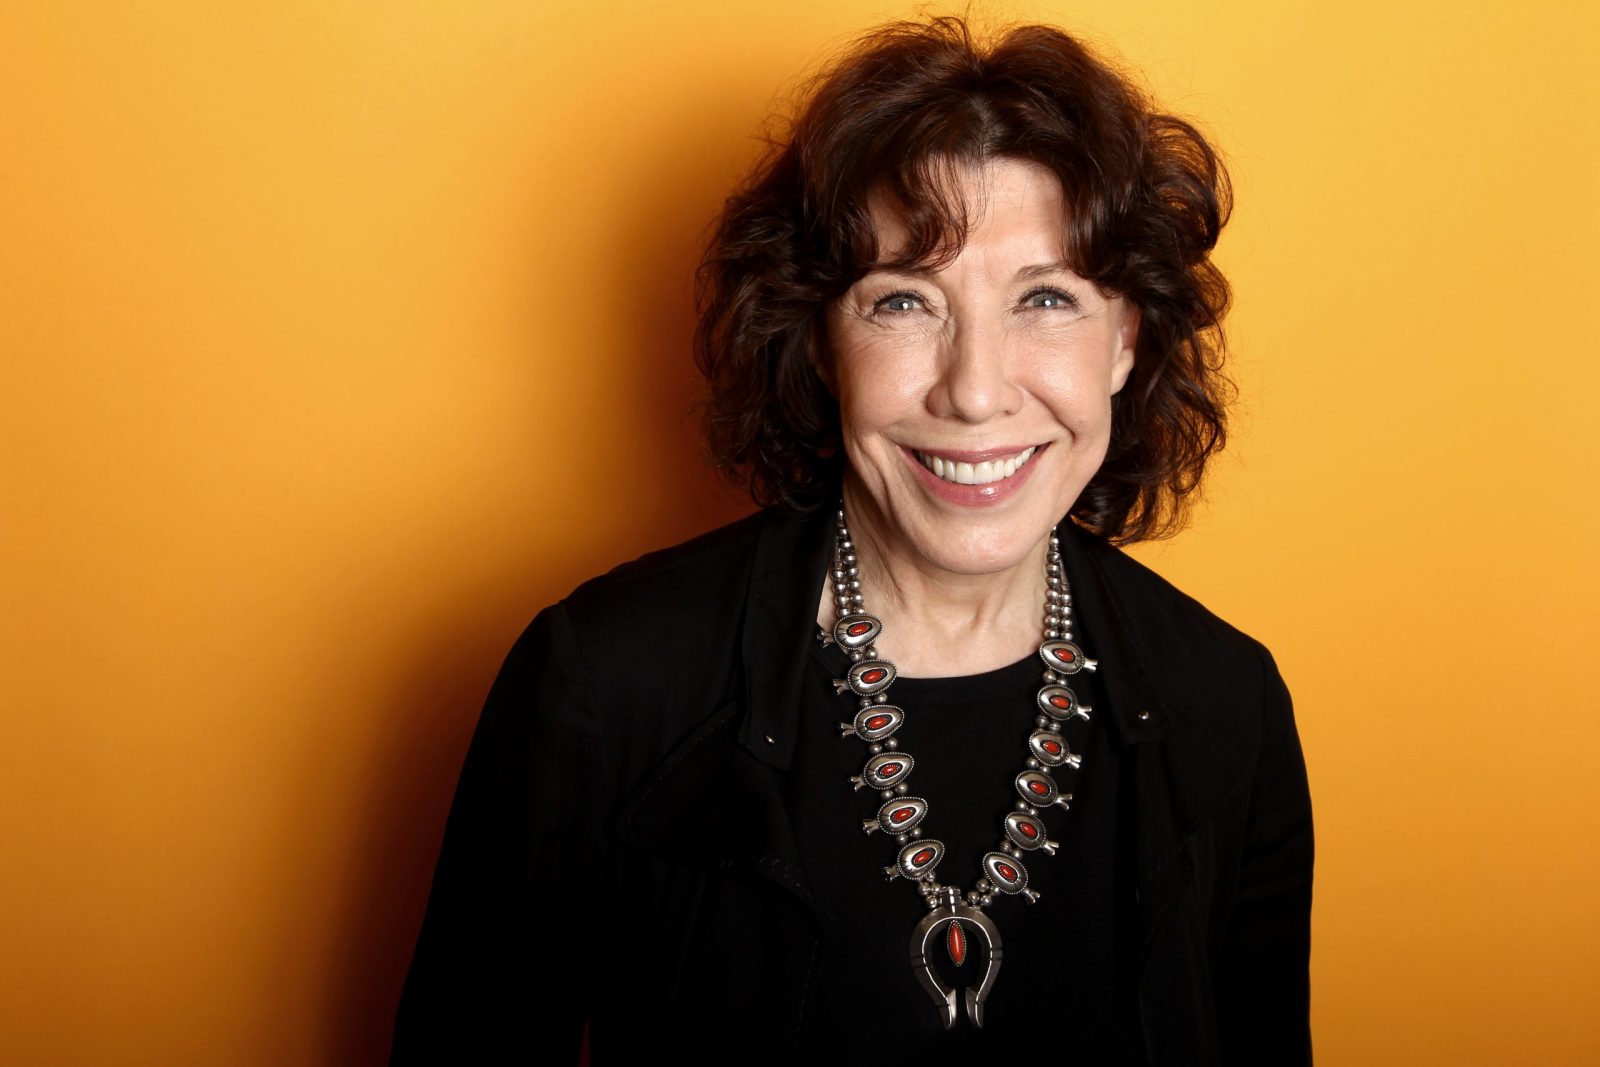 Lily Tomlin Actress Biography Height Weight Age Movies Husband Family Salary Net Worth Facts More